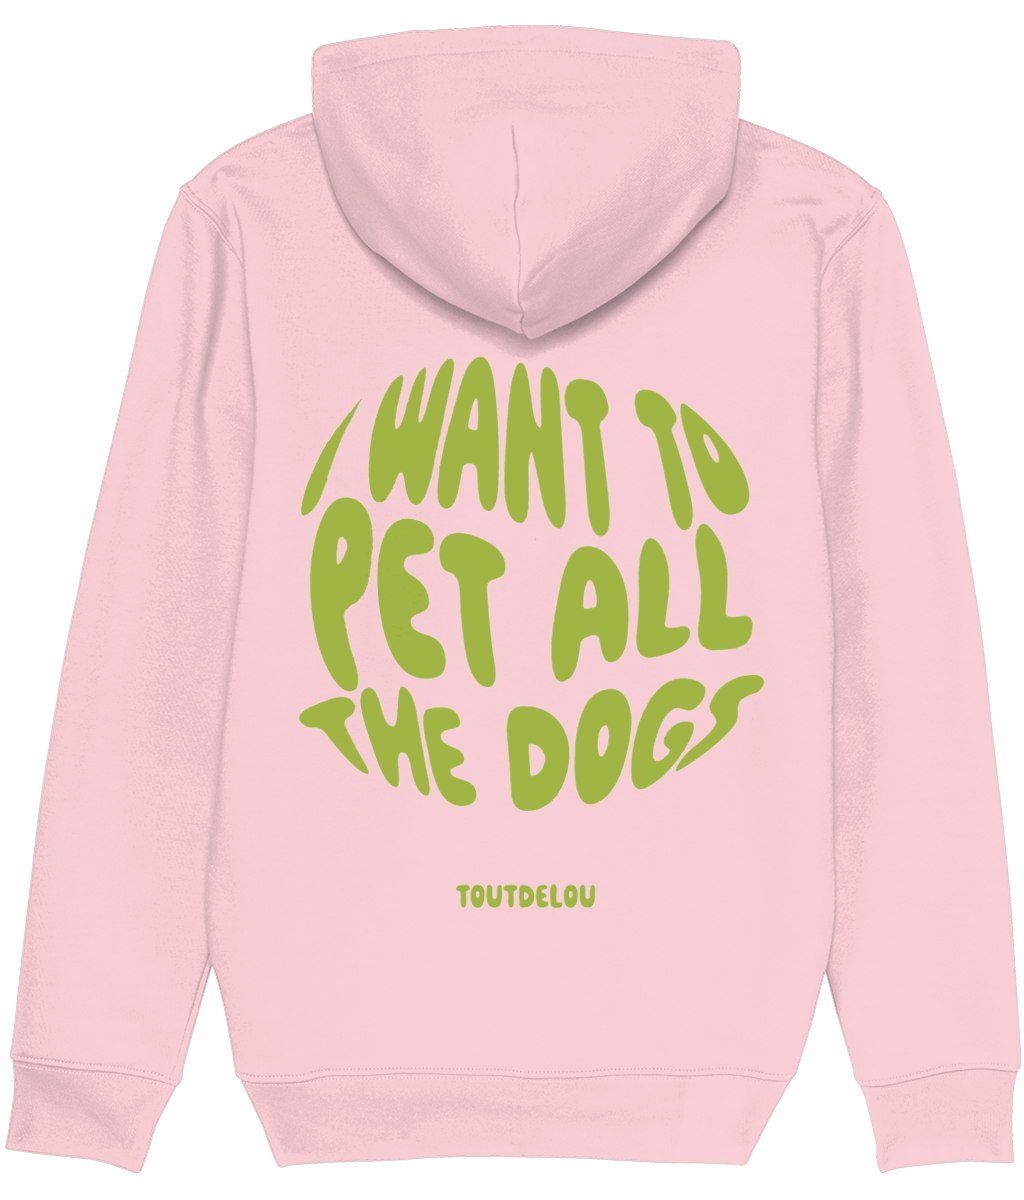 Hoodie - pet all the dogs - green - print on front and back